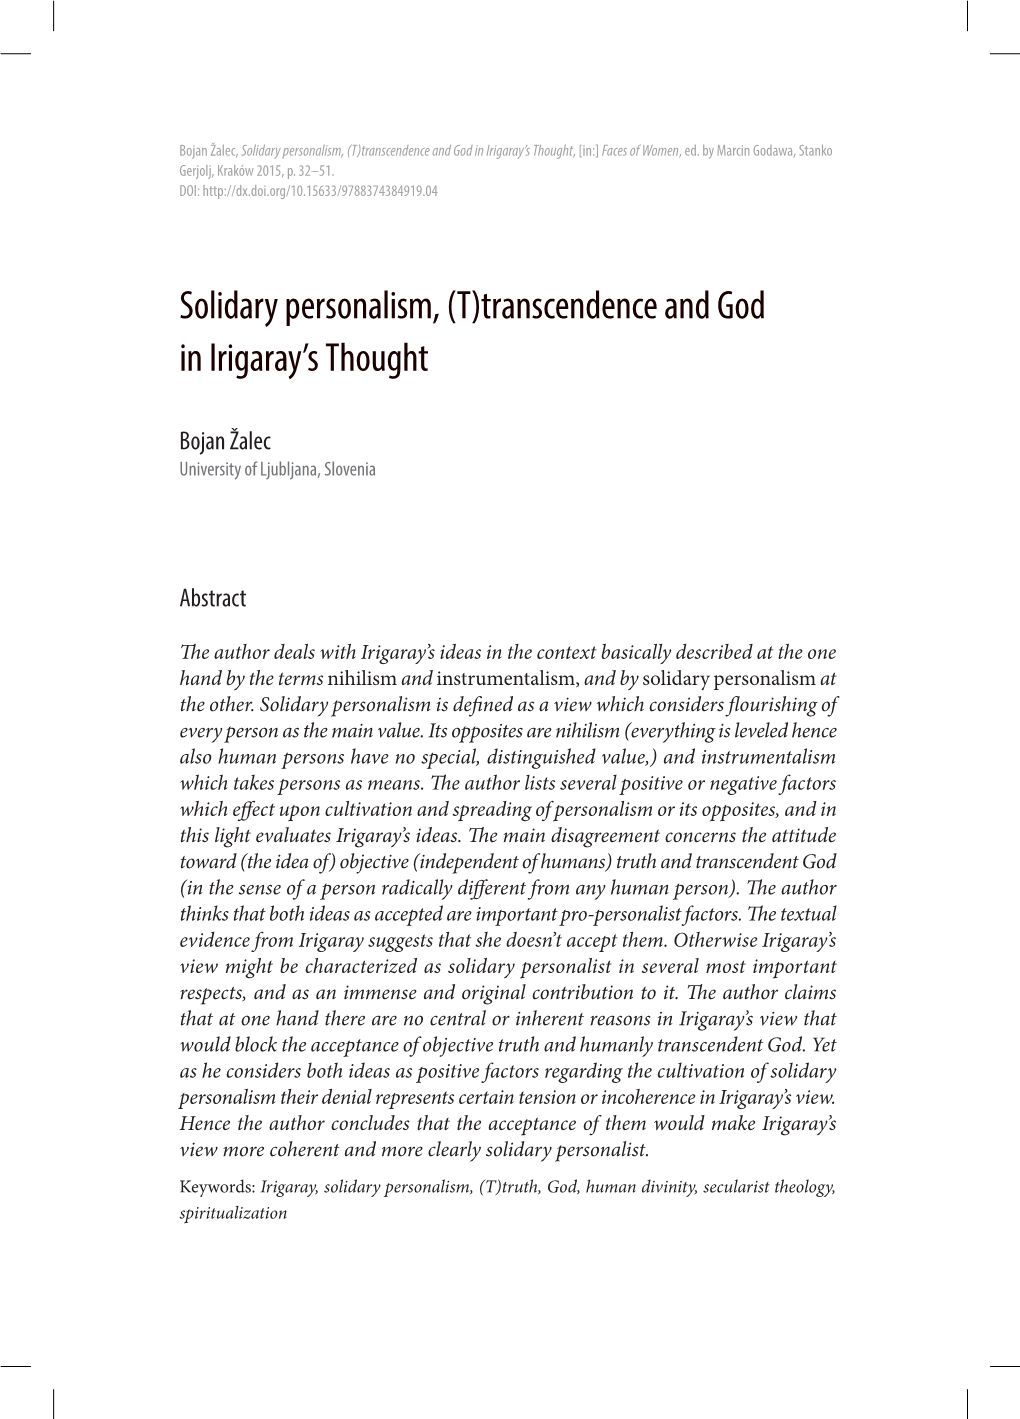 Solidary Personalism, (T)Transcendence and God in Irigaray’S Thought, [In:] Faces of Women, Ed